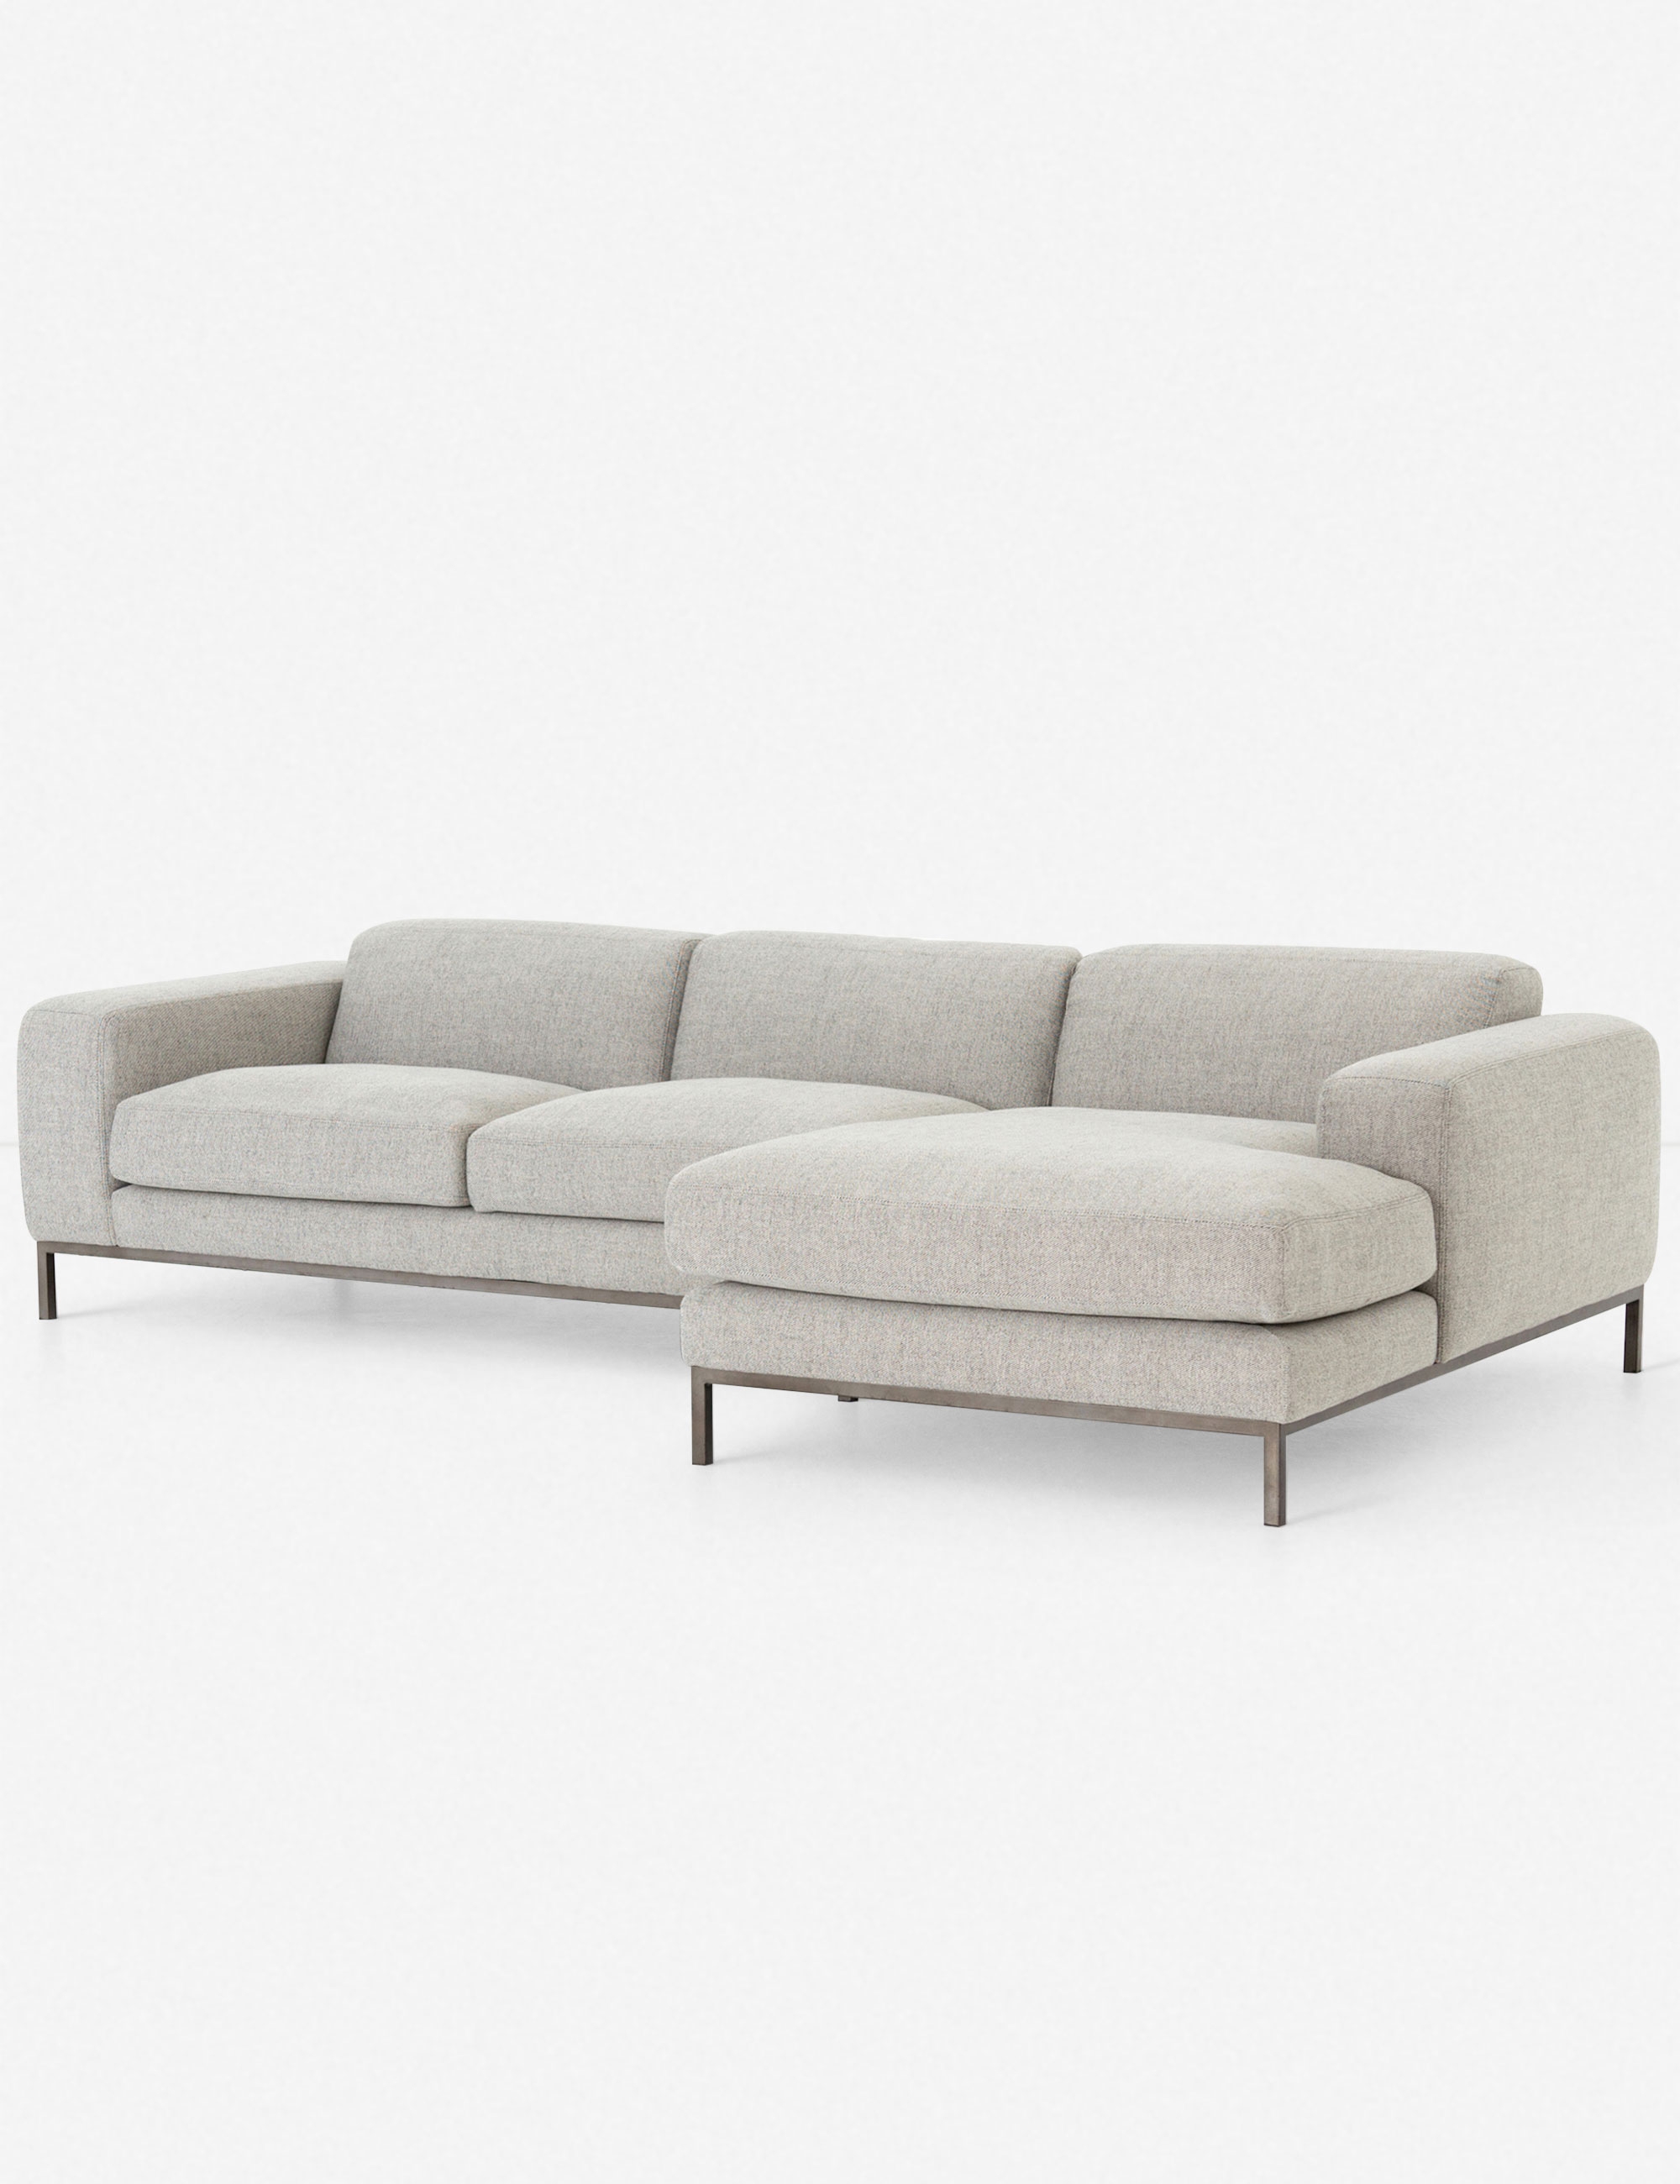 Christie Sectional Sofa - Image 1